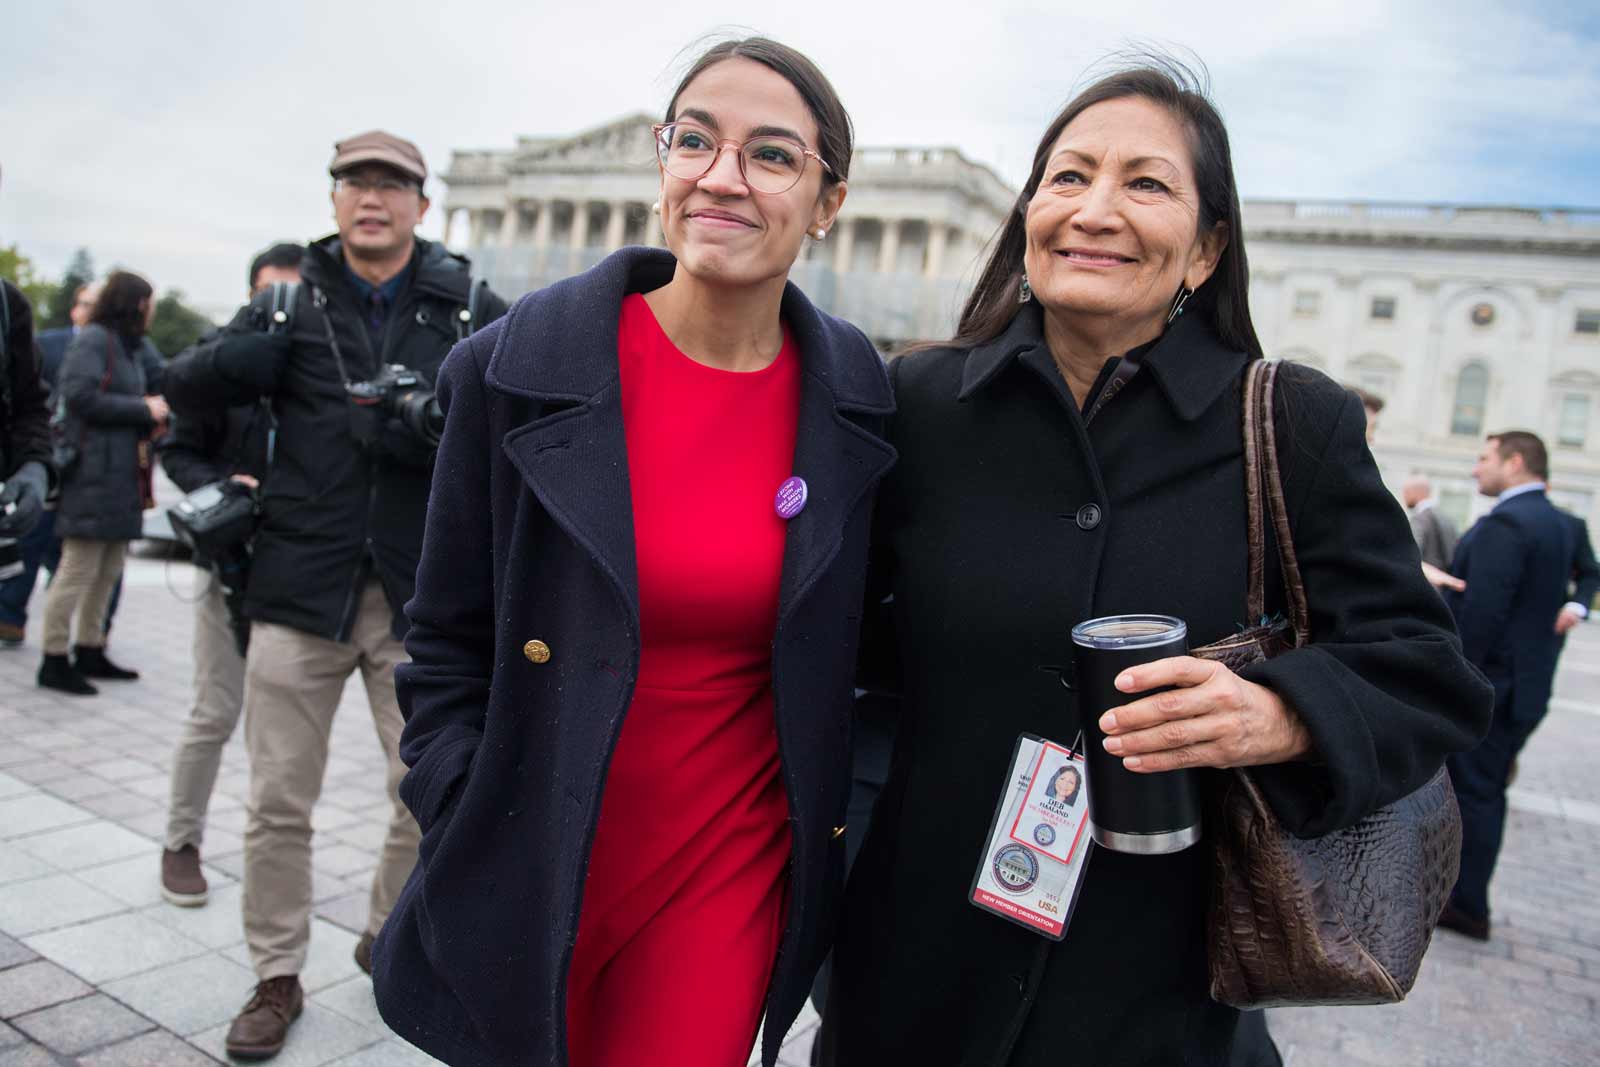 Newly elected members of the House of Representatives Alexandria Ocasio-Cortez (NY) and Deb Haaland (NM) after the congressional freshman class photo, the Capitol, Washington, D.C., November 14, 2018